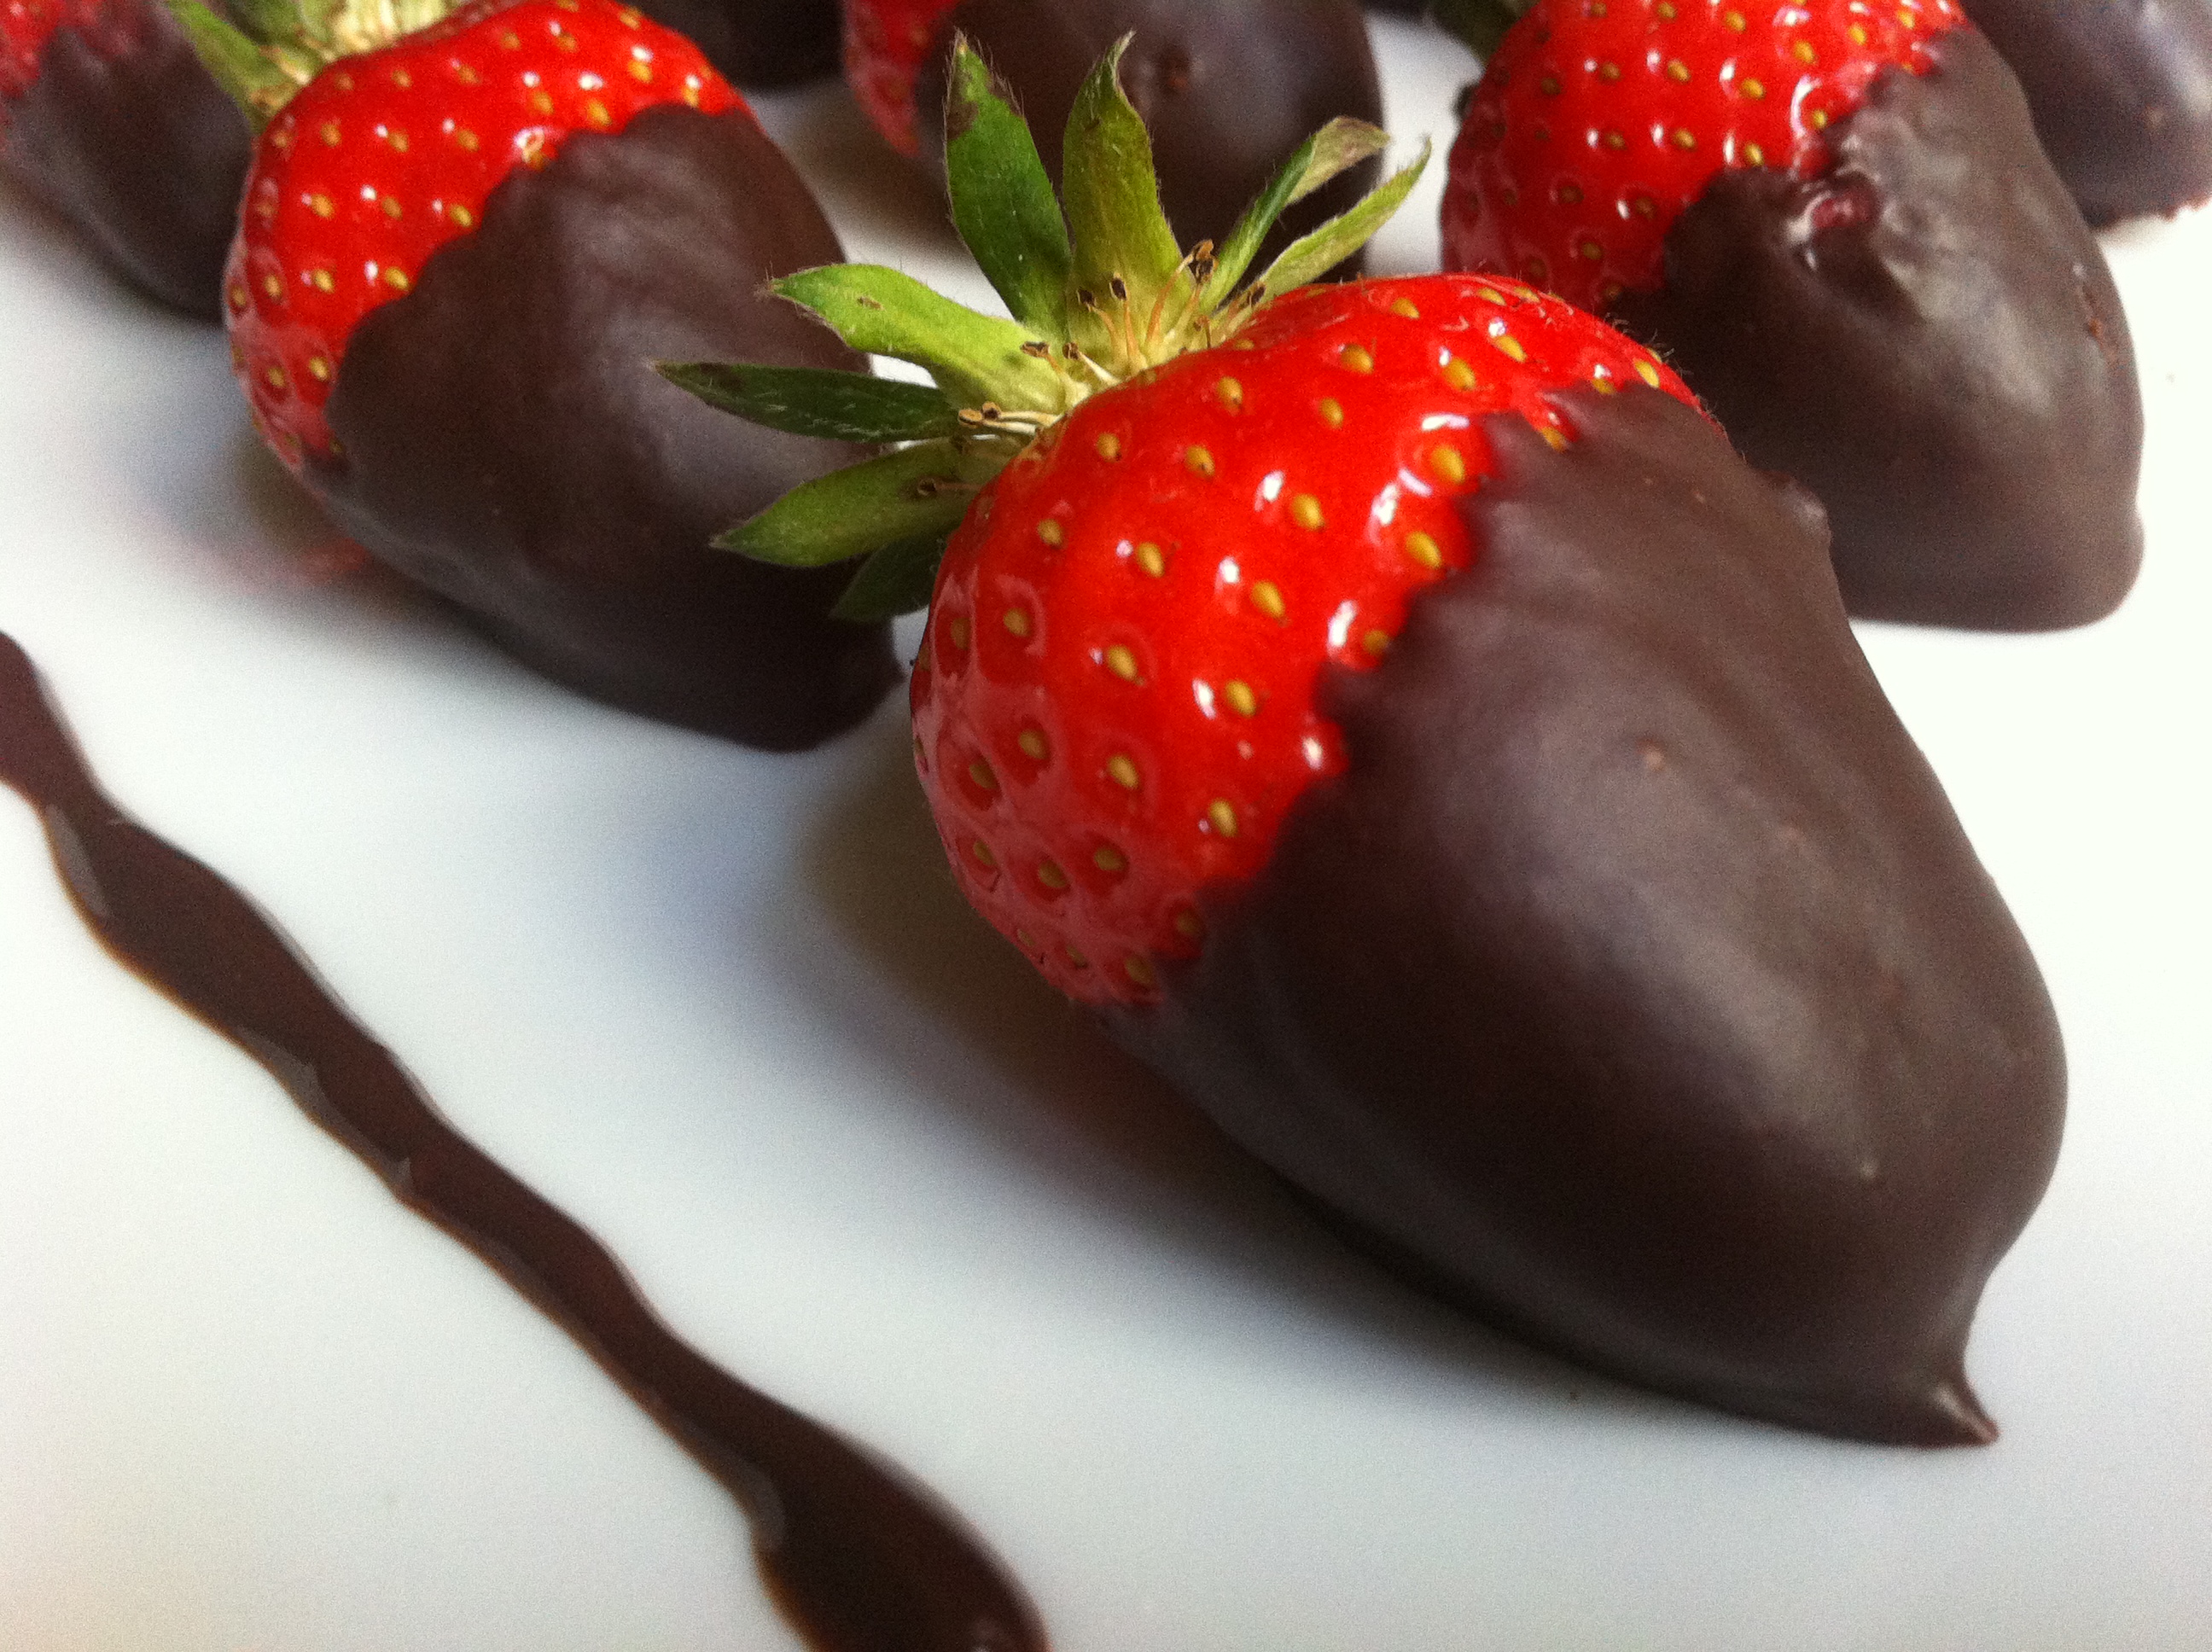 Strawberries dipped in chocolate. Photo taken on May 21, 2014.